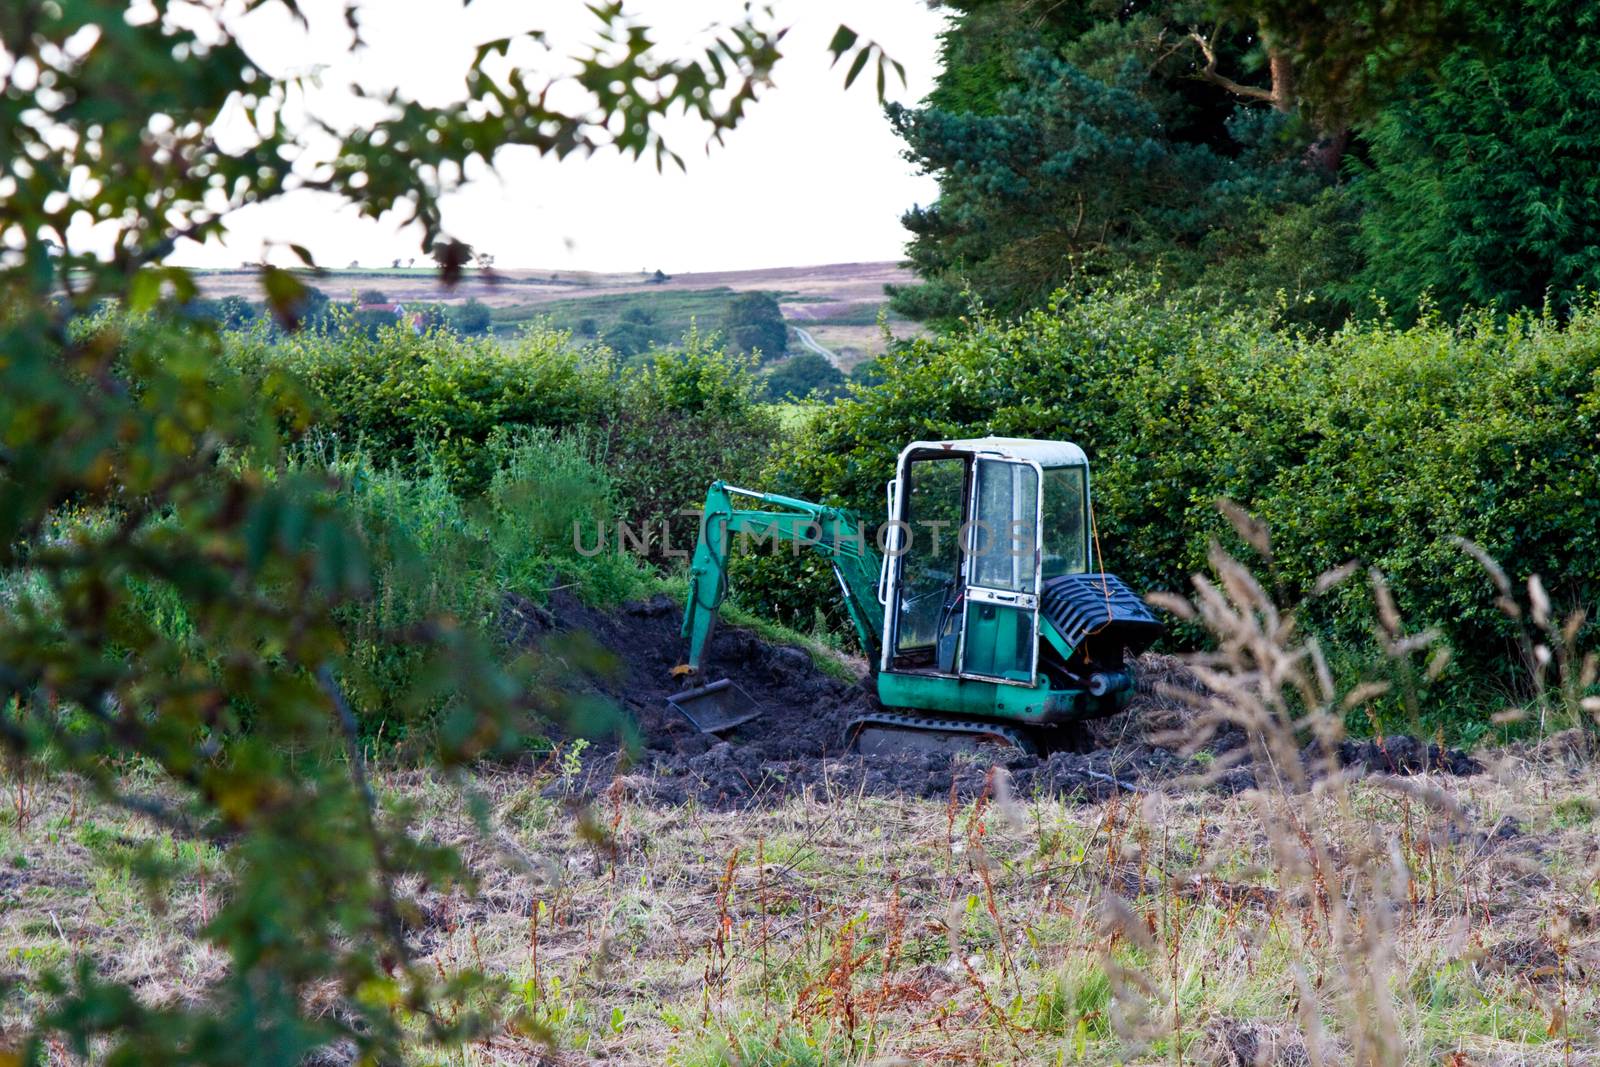 Digger in a farmers field